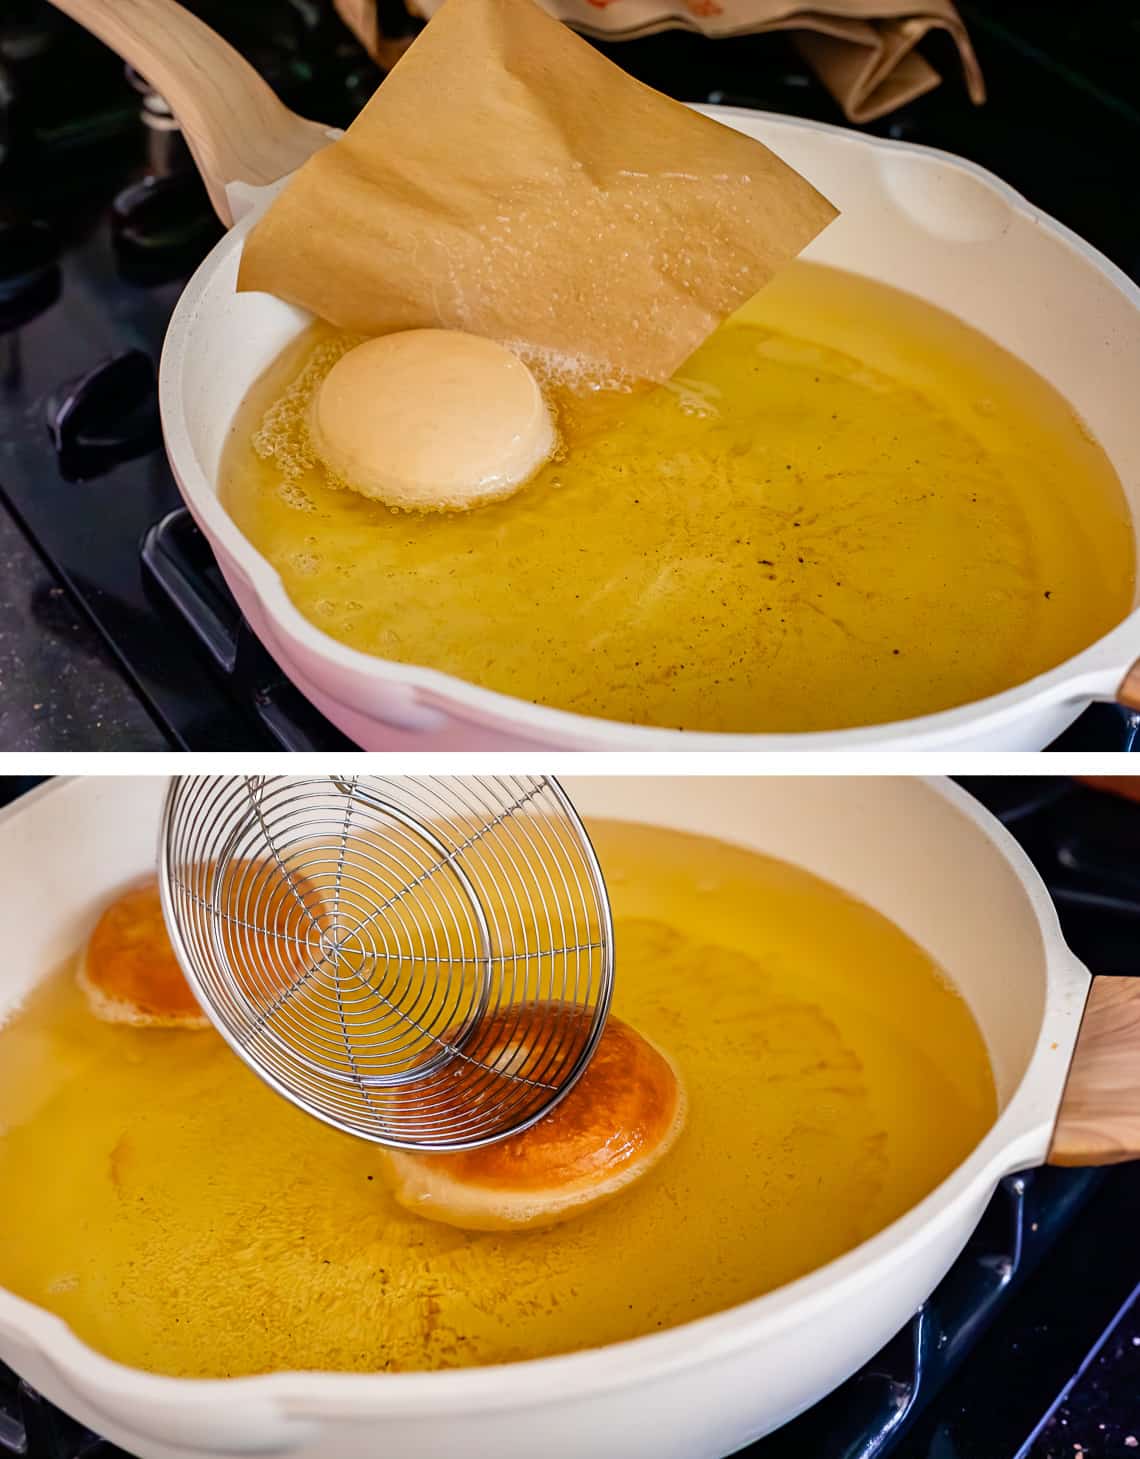 top pulling paper out from under the donut in the oil, bottom flipping the donut in the oil.